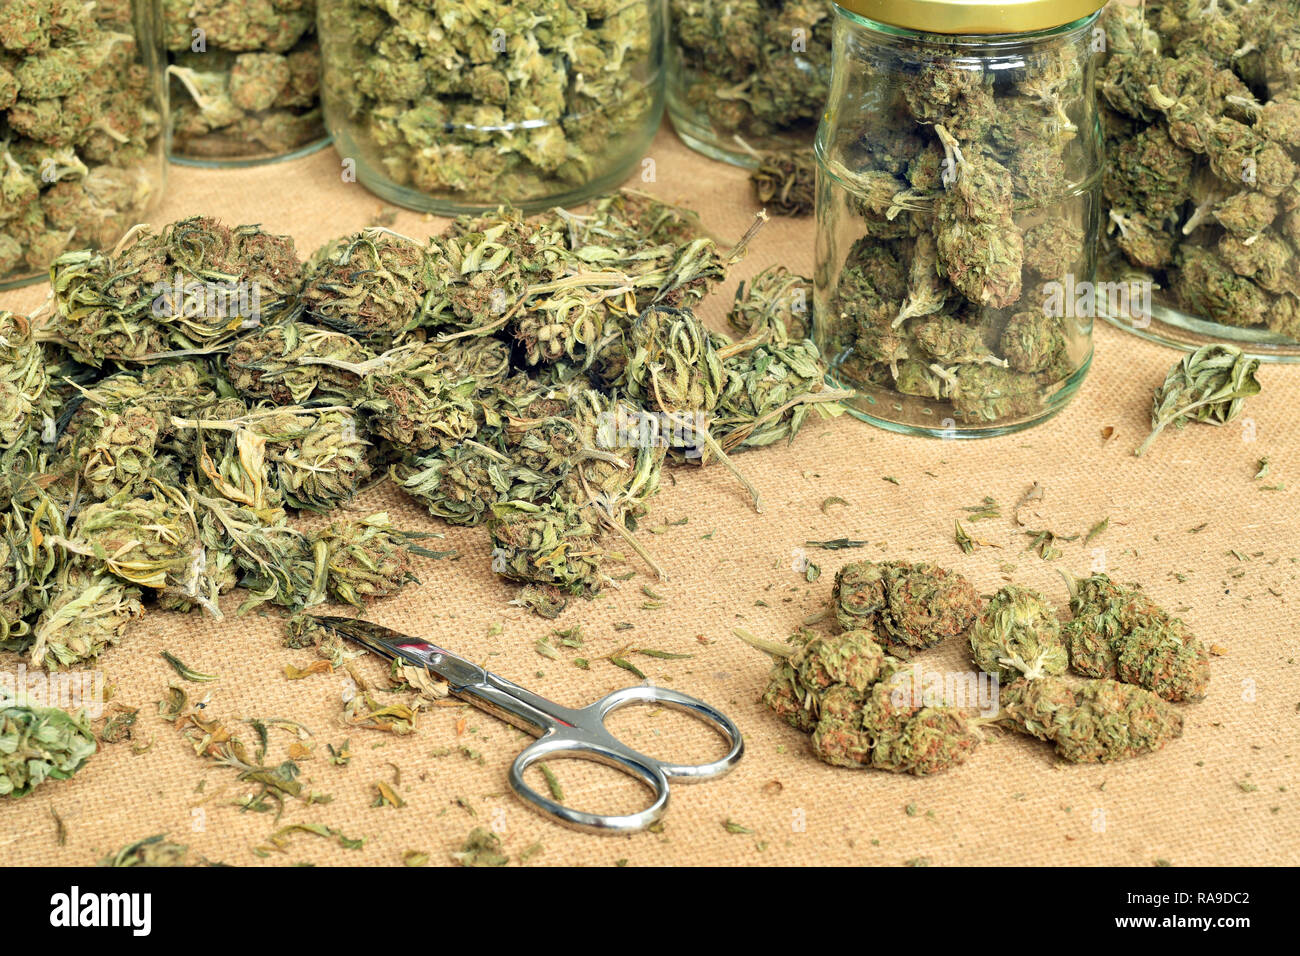 Trimming of cannabis buds and storing them in a glass jars Stock Photo